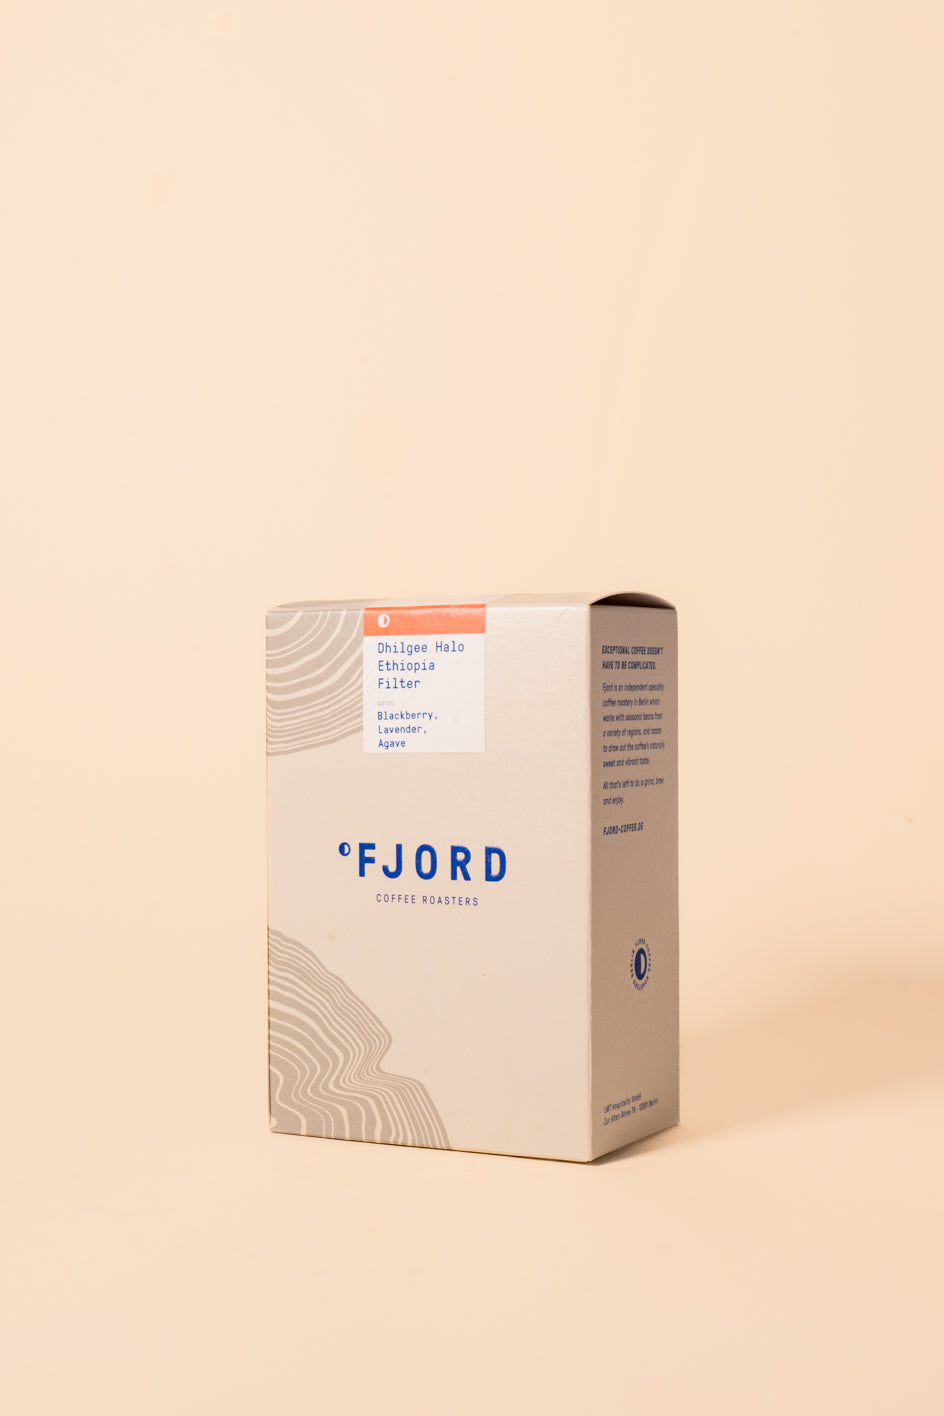 Fjord Coffee | Ethiopia, Dhilgee Halo Filter - 250g